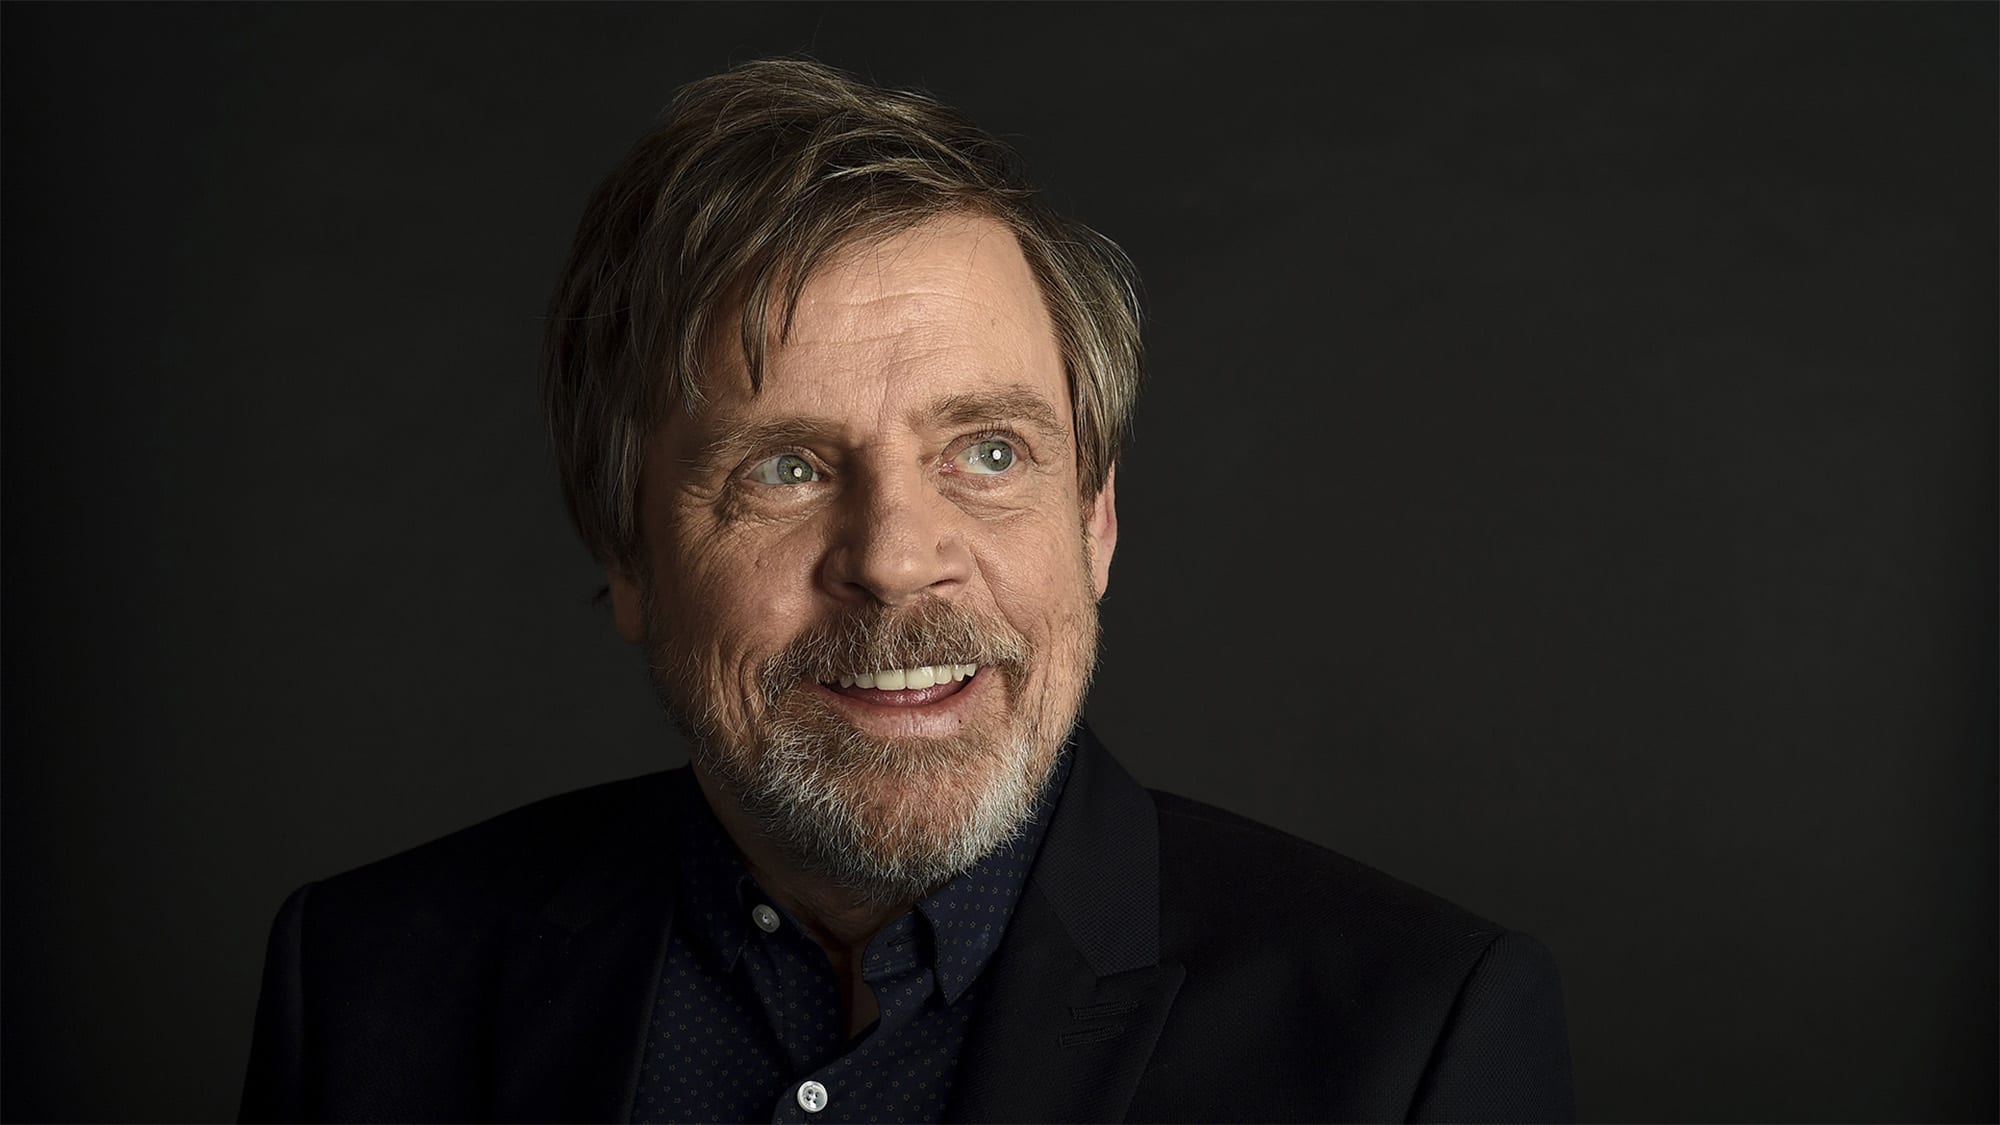 Here are ten of the biggest live-action stars who also kill it voicing cartoon characters, from Mark Hamill to Will Arnett.